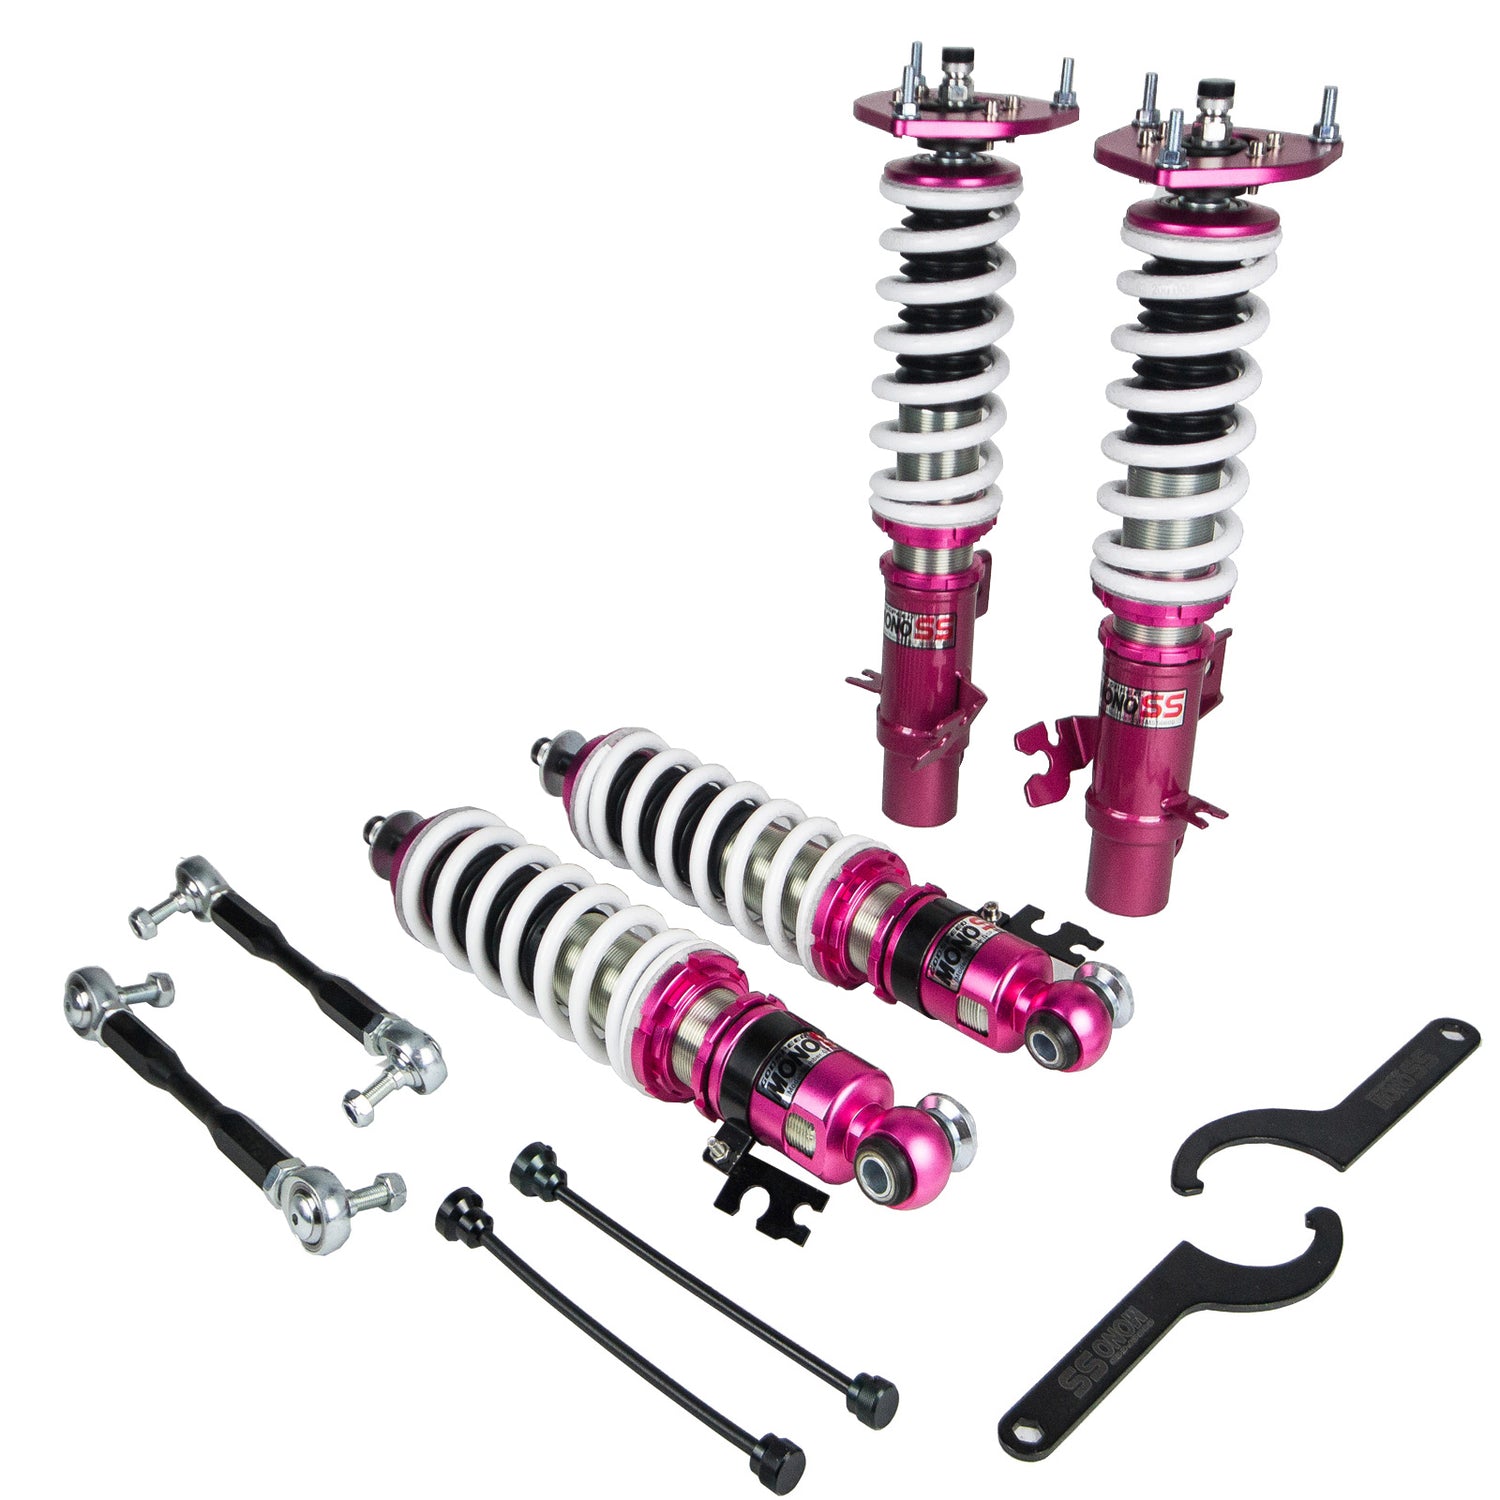 Godspeed MSS0600 MonoSS Coilover Lowering Kit, Fully Adjustable, Ride Height, Spring Tension And 16 Click Damping, MINI Cooper(R56) Hardtop 2007-13